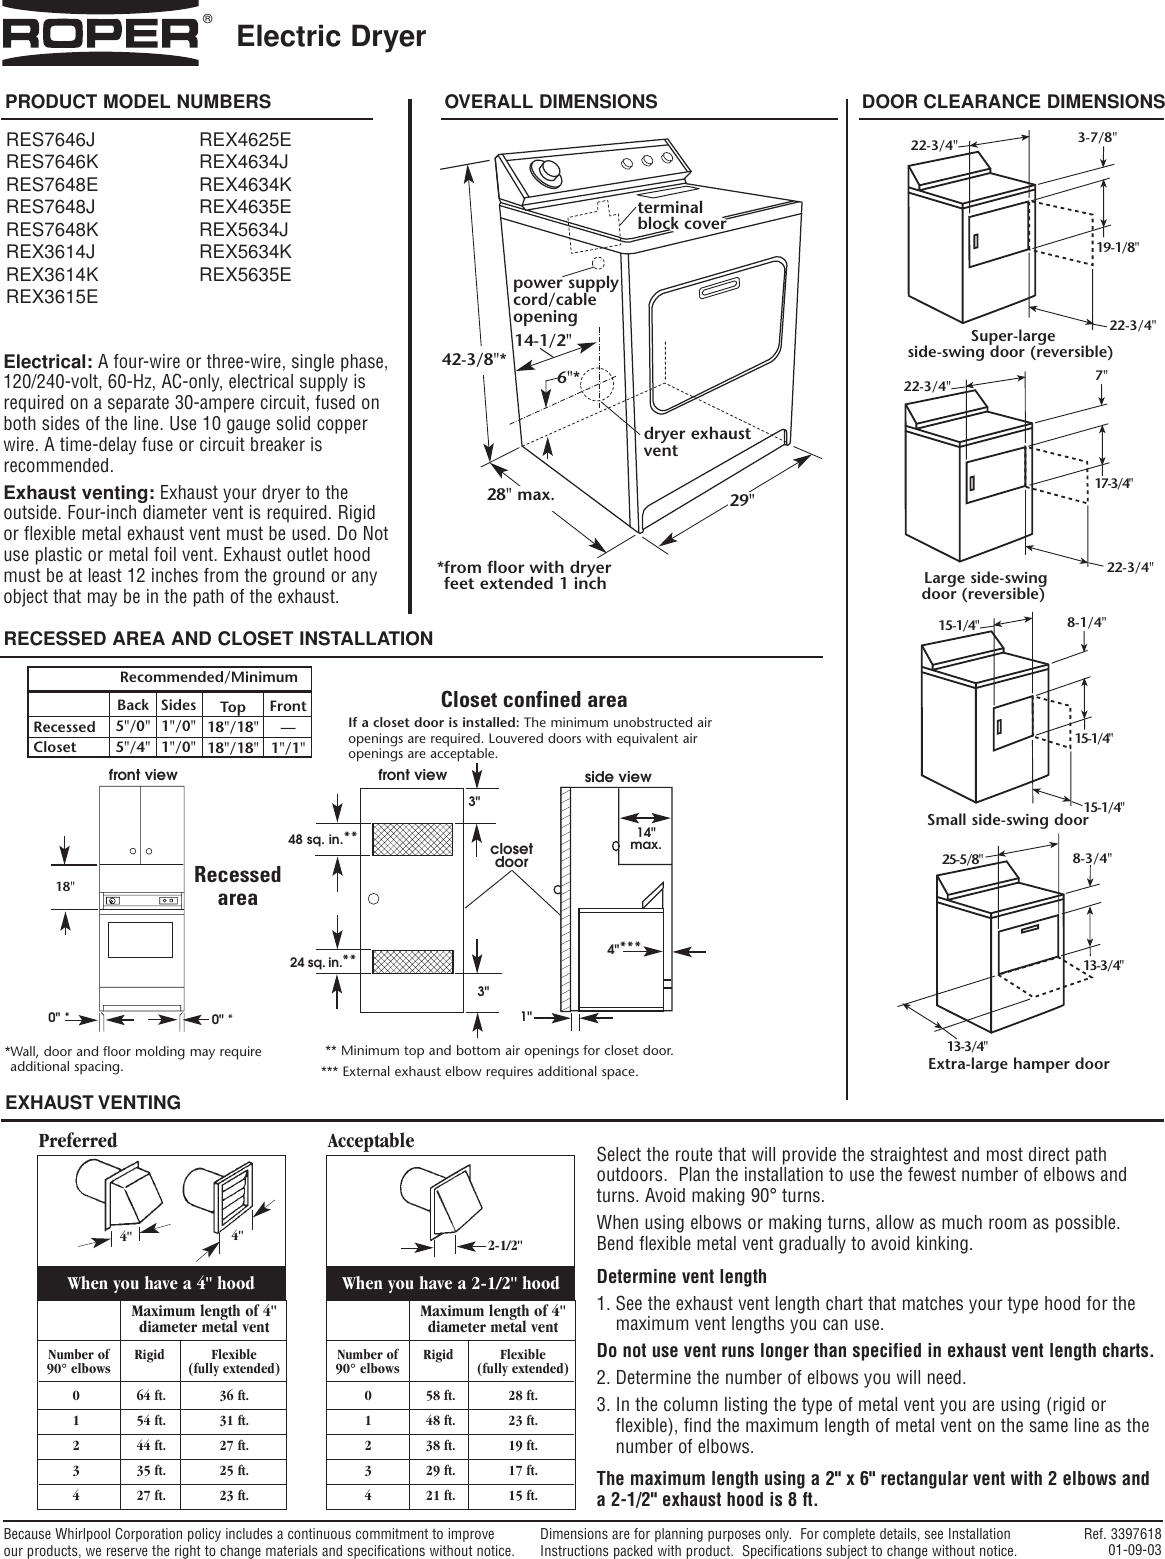 Page 1 of 1 - Roper Roper-Electric-Dryer-Res7646J-Users-Manual- 3397618-D_RO  Roper-electric-dryer-res7646j-users-manual